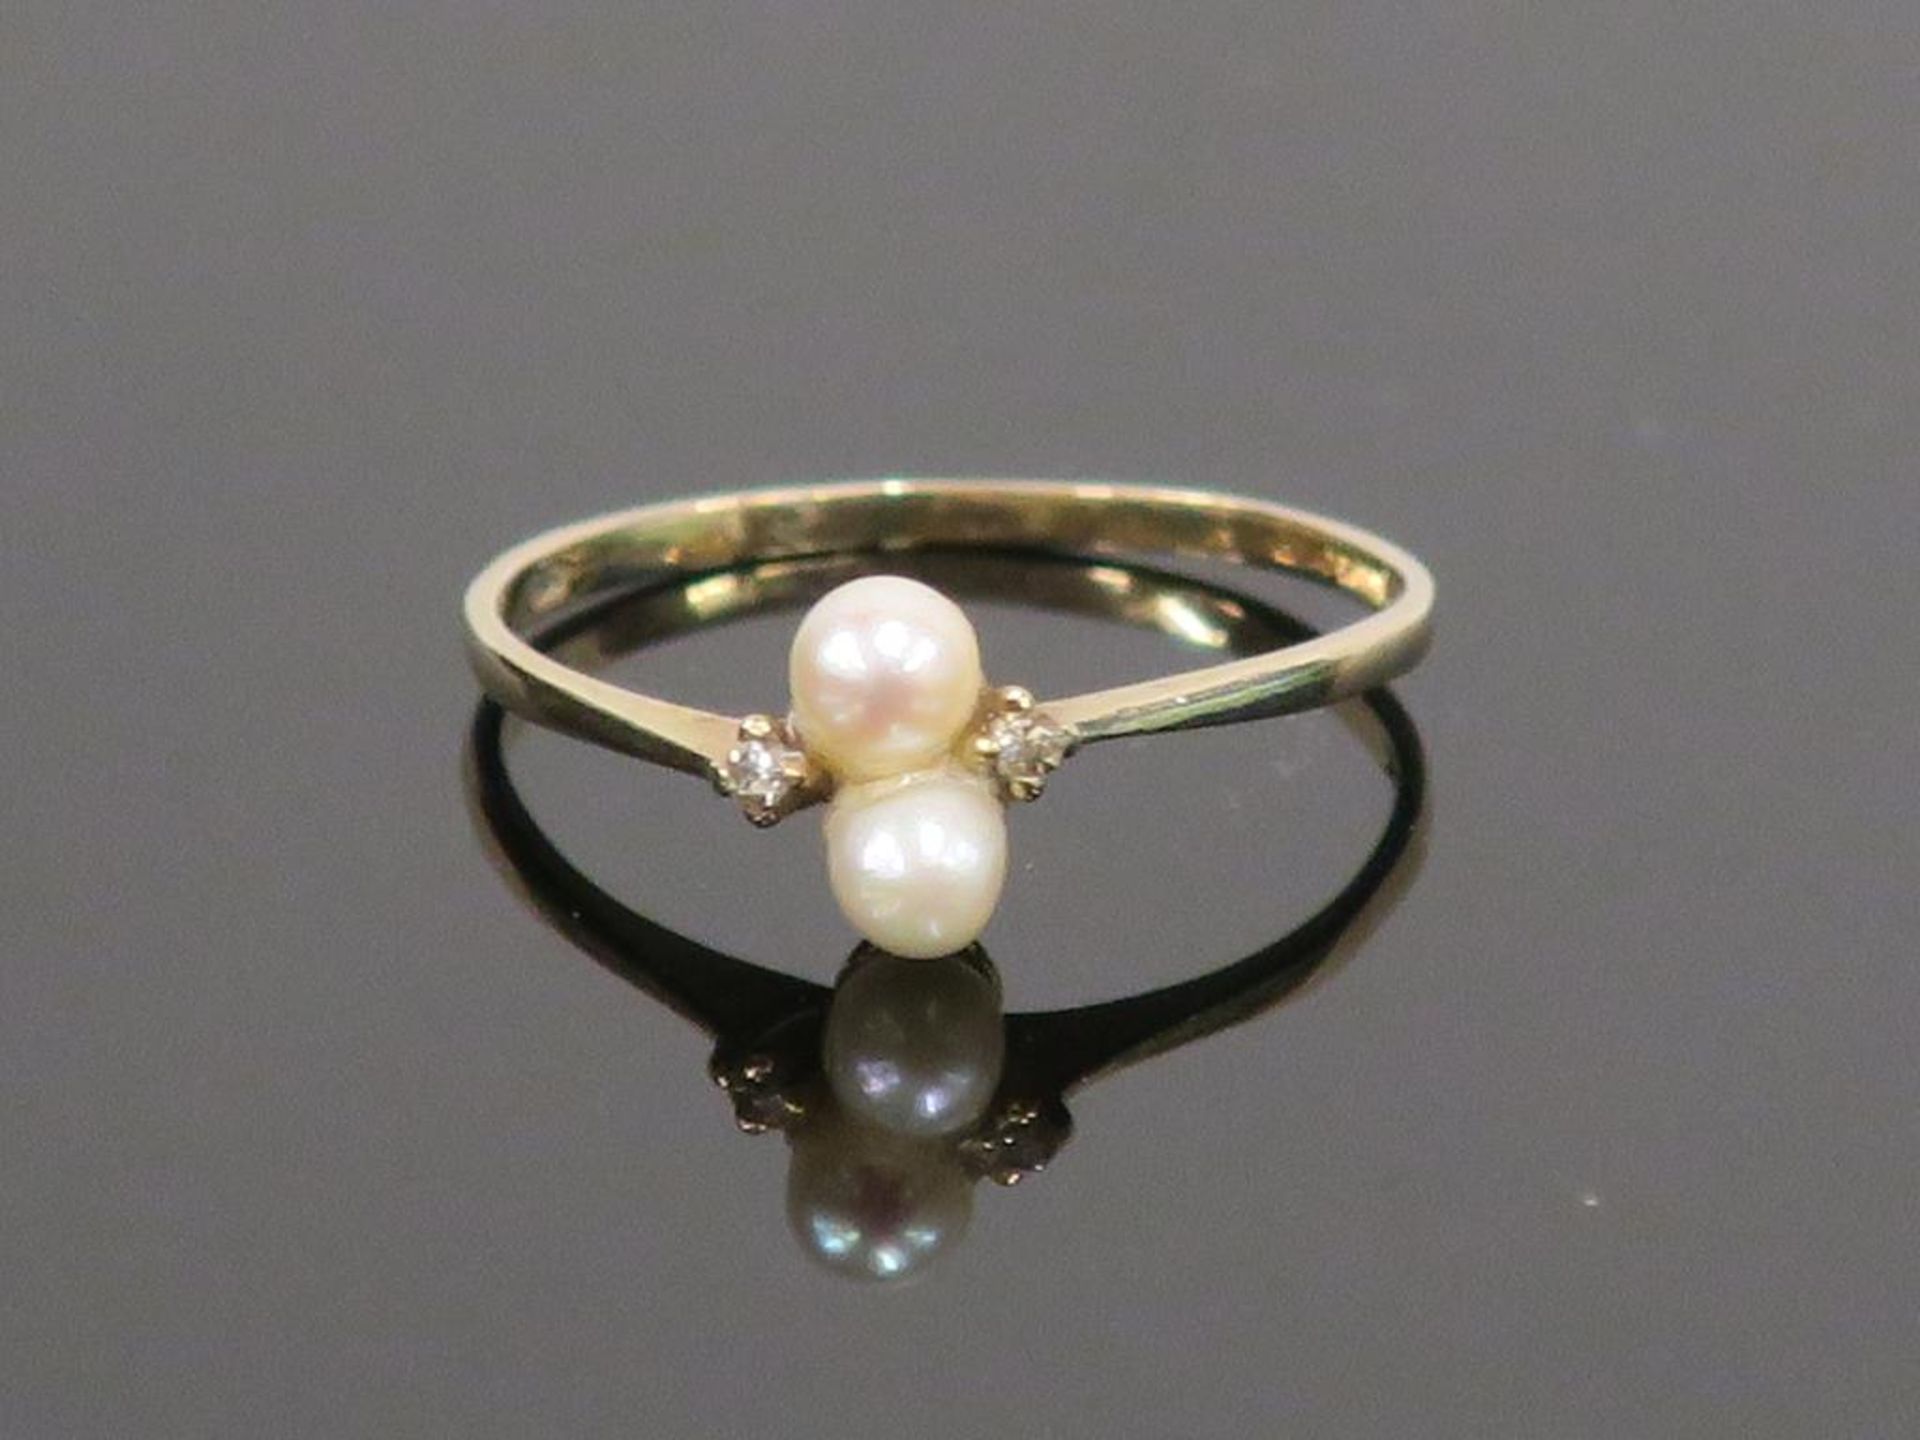 A 9ct Gold Diamond and Pearl Ring (size N 1/2) (est £40-£80)